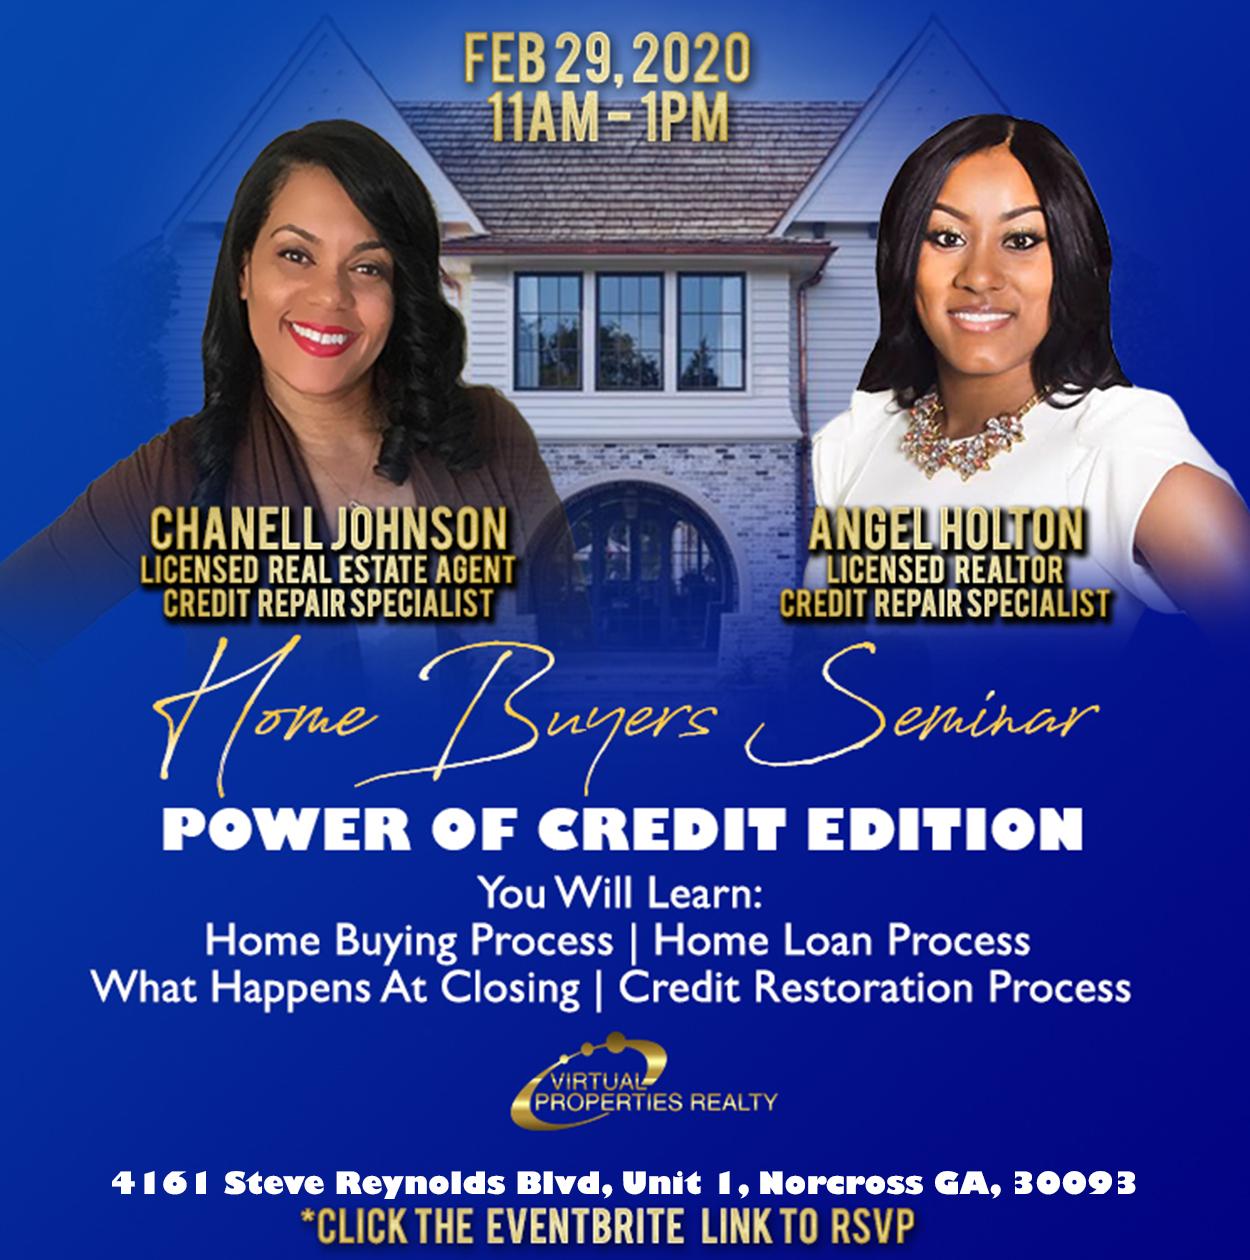 Home Buyers Seminar - Power of Credit Edition **GET THE FACTS** YOU'RE INVITED!!